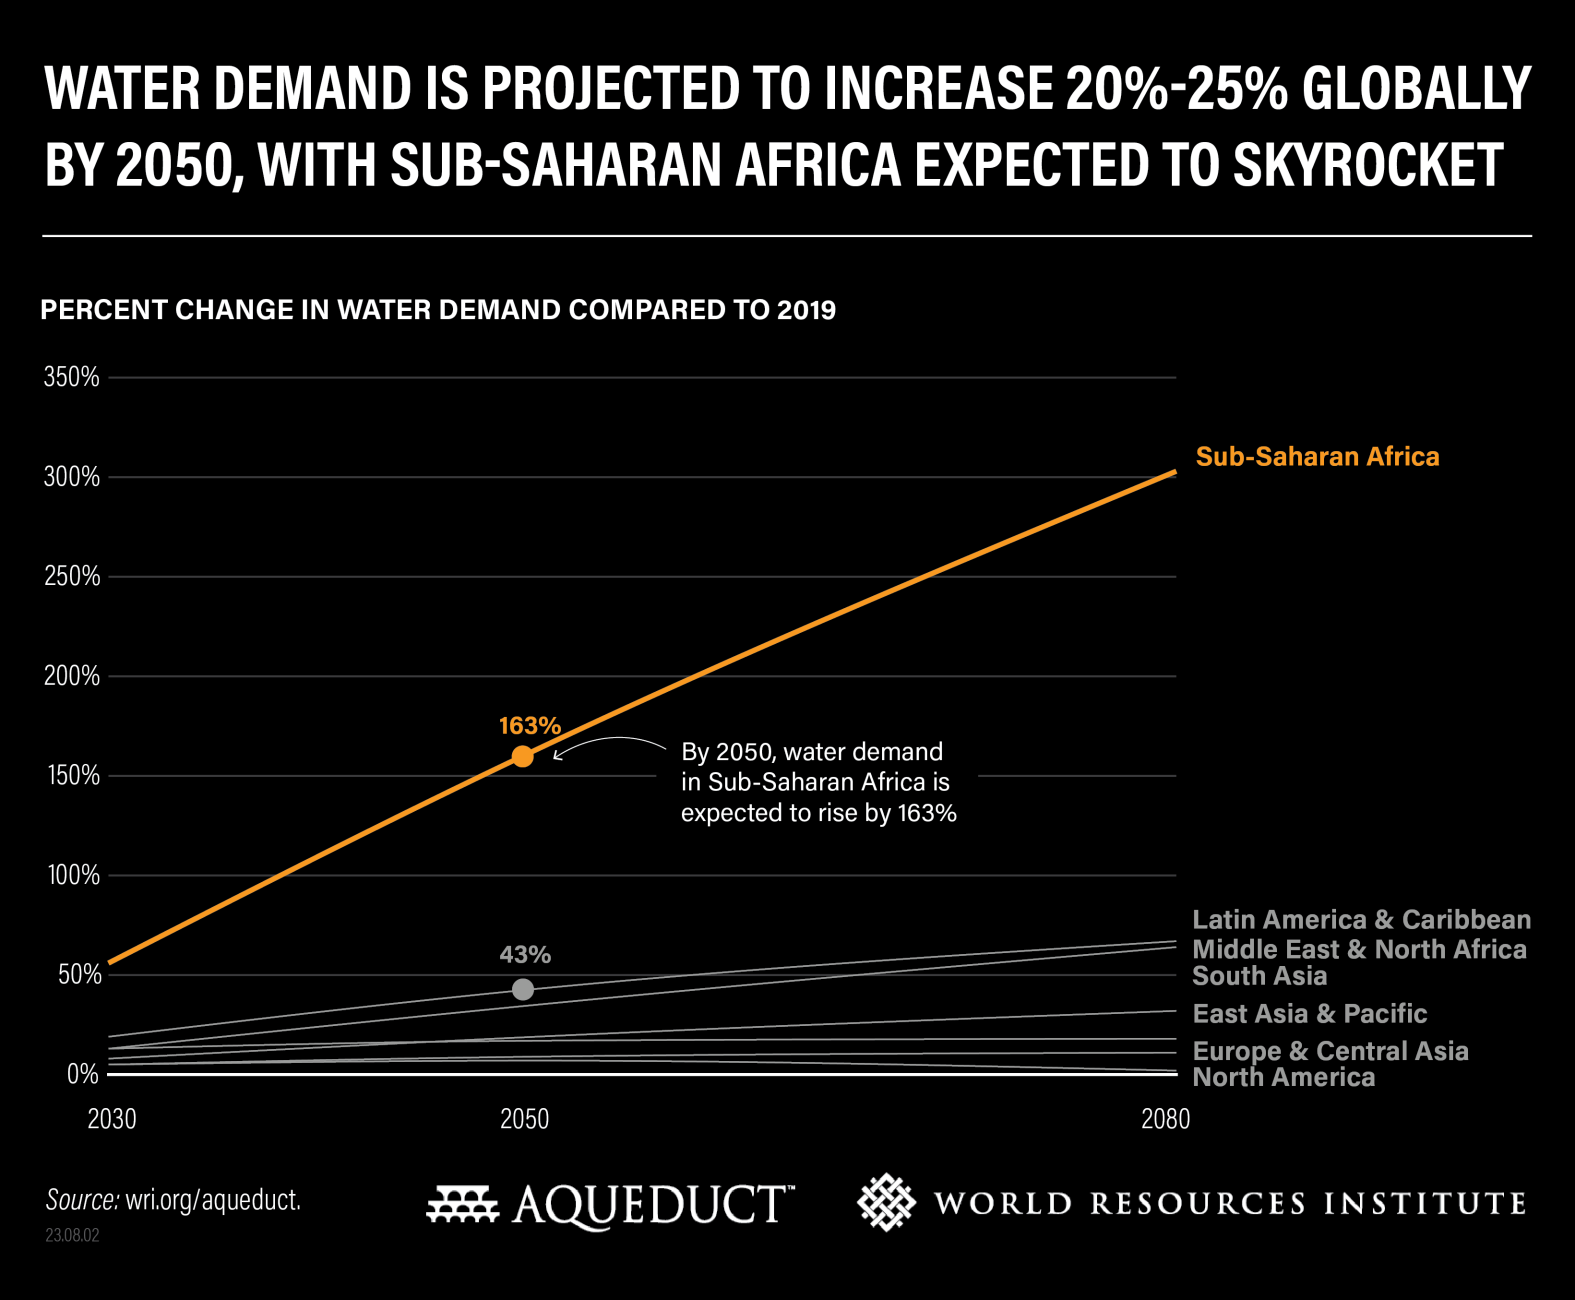 Graph showing the percent change in water demand compared with 2019 projected to 2080. The biggest change in water demand between now and 2050 will occur in Sub-Saharan Africa. While most countries in Sub-Saharan Africa are not extremely water-stressed right now, demand is growing faster there than any other region in the world. By 2050, water demand in Sub-Saharan Africa is expected to skyrocket by 163 percent — 4 times the rate of change compared to Latin America, the second-highest region, which is expected to see a 43 percent increase in water demand. Data: wri.org/aqueduct. Graphic: WRI